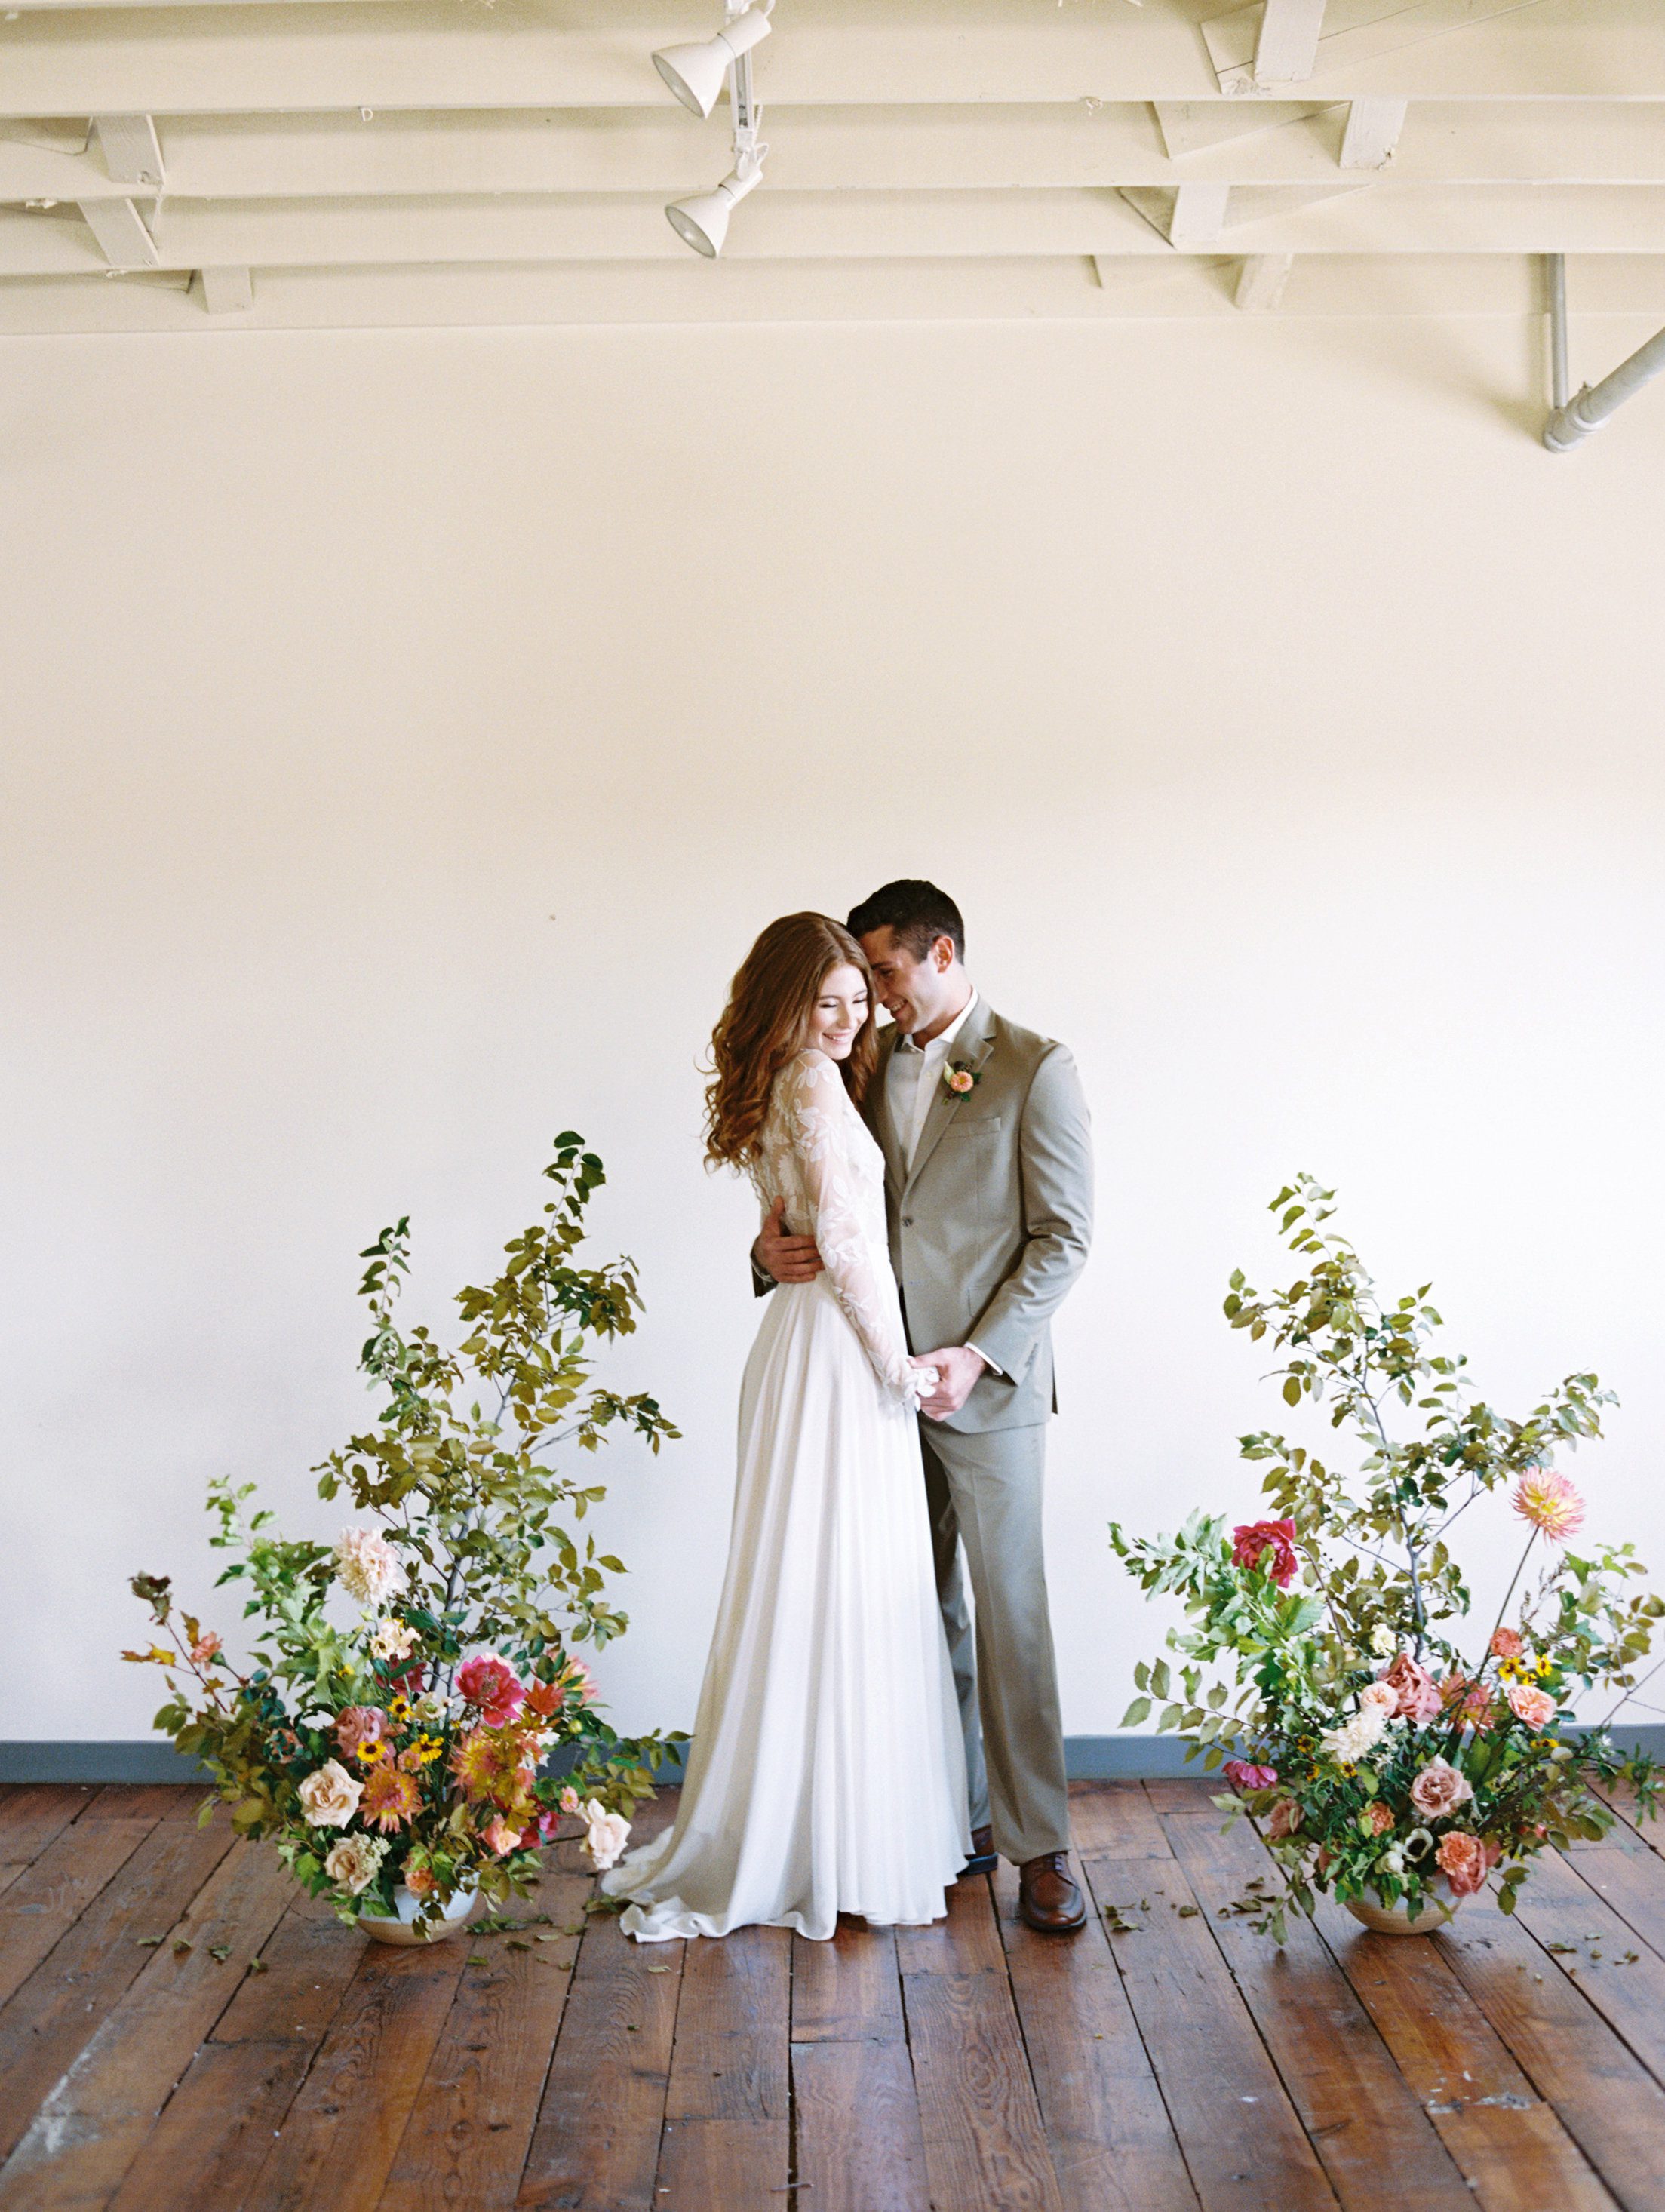 Pottery inspired wedding with ikebana style floral arrangements